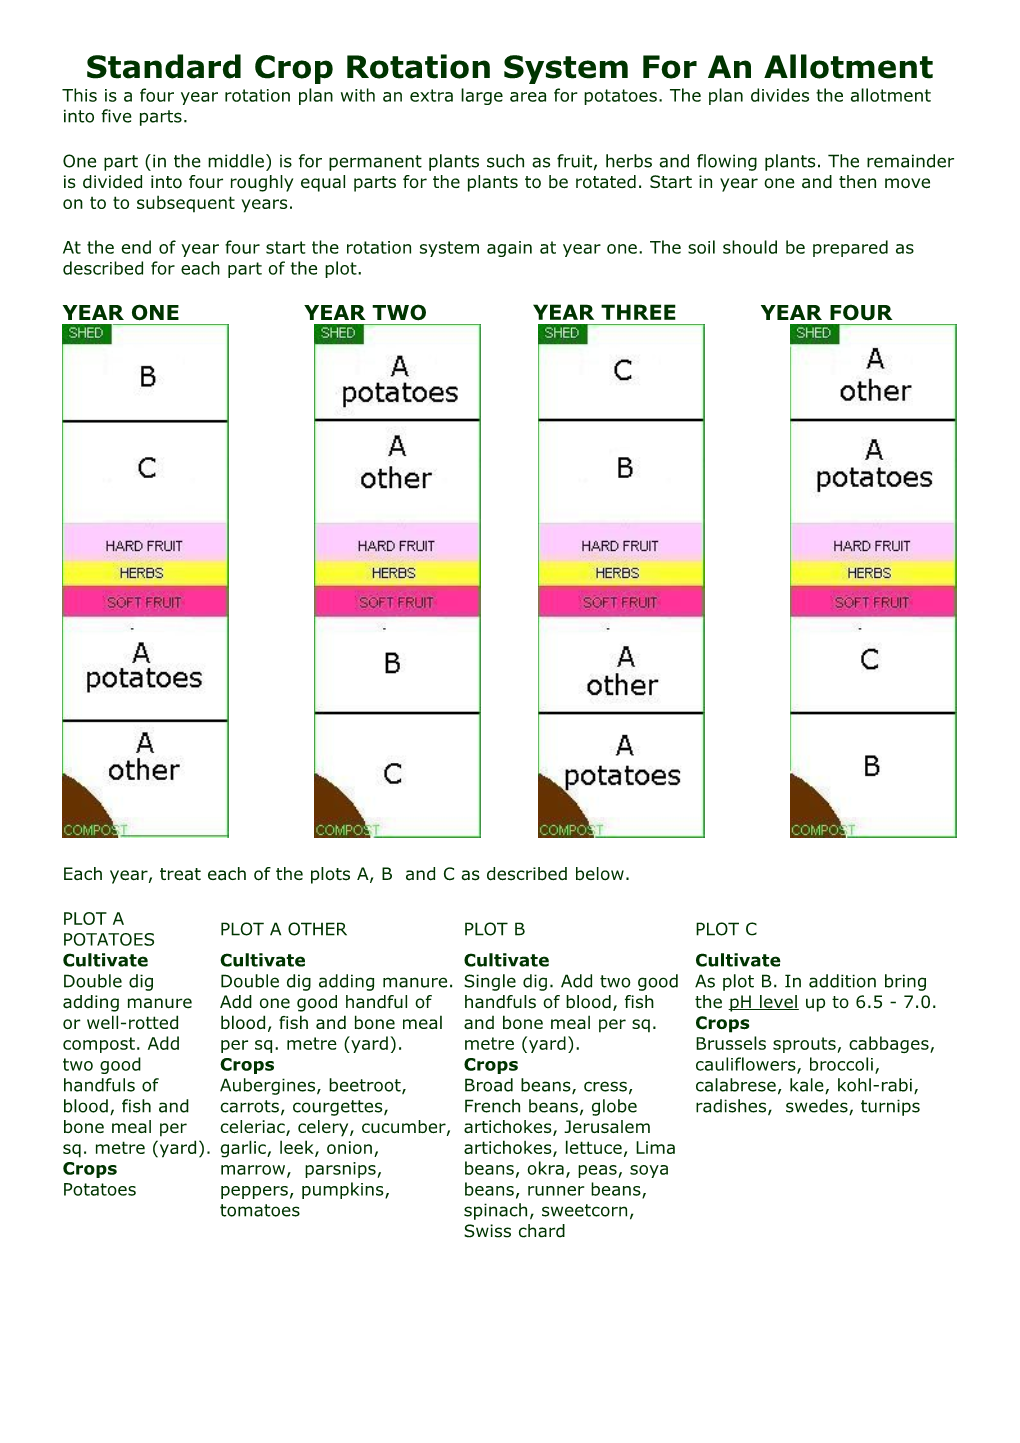 Standard Crop Rotation System for an Allotment